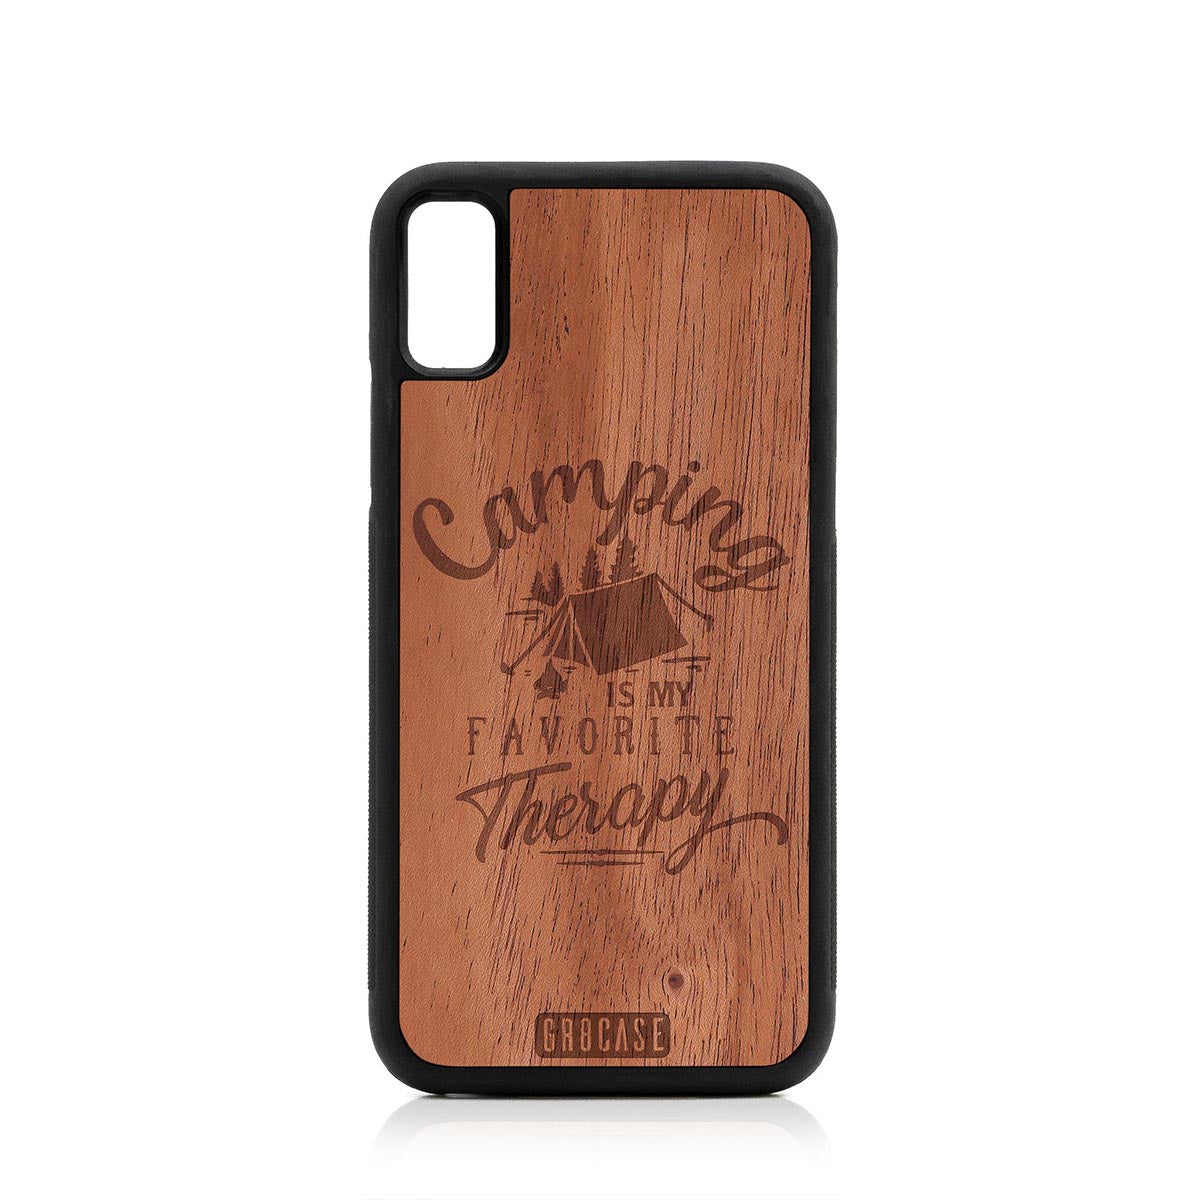 Camping Is My Favorite Therapy Design Wood Case For iPhone X/XS by GR8CASE